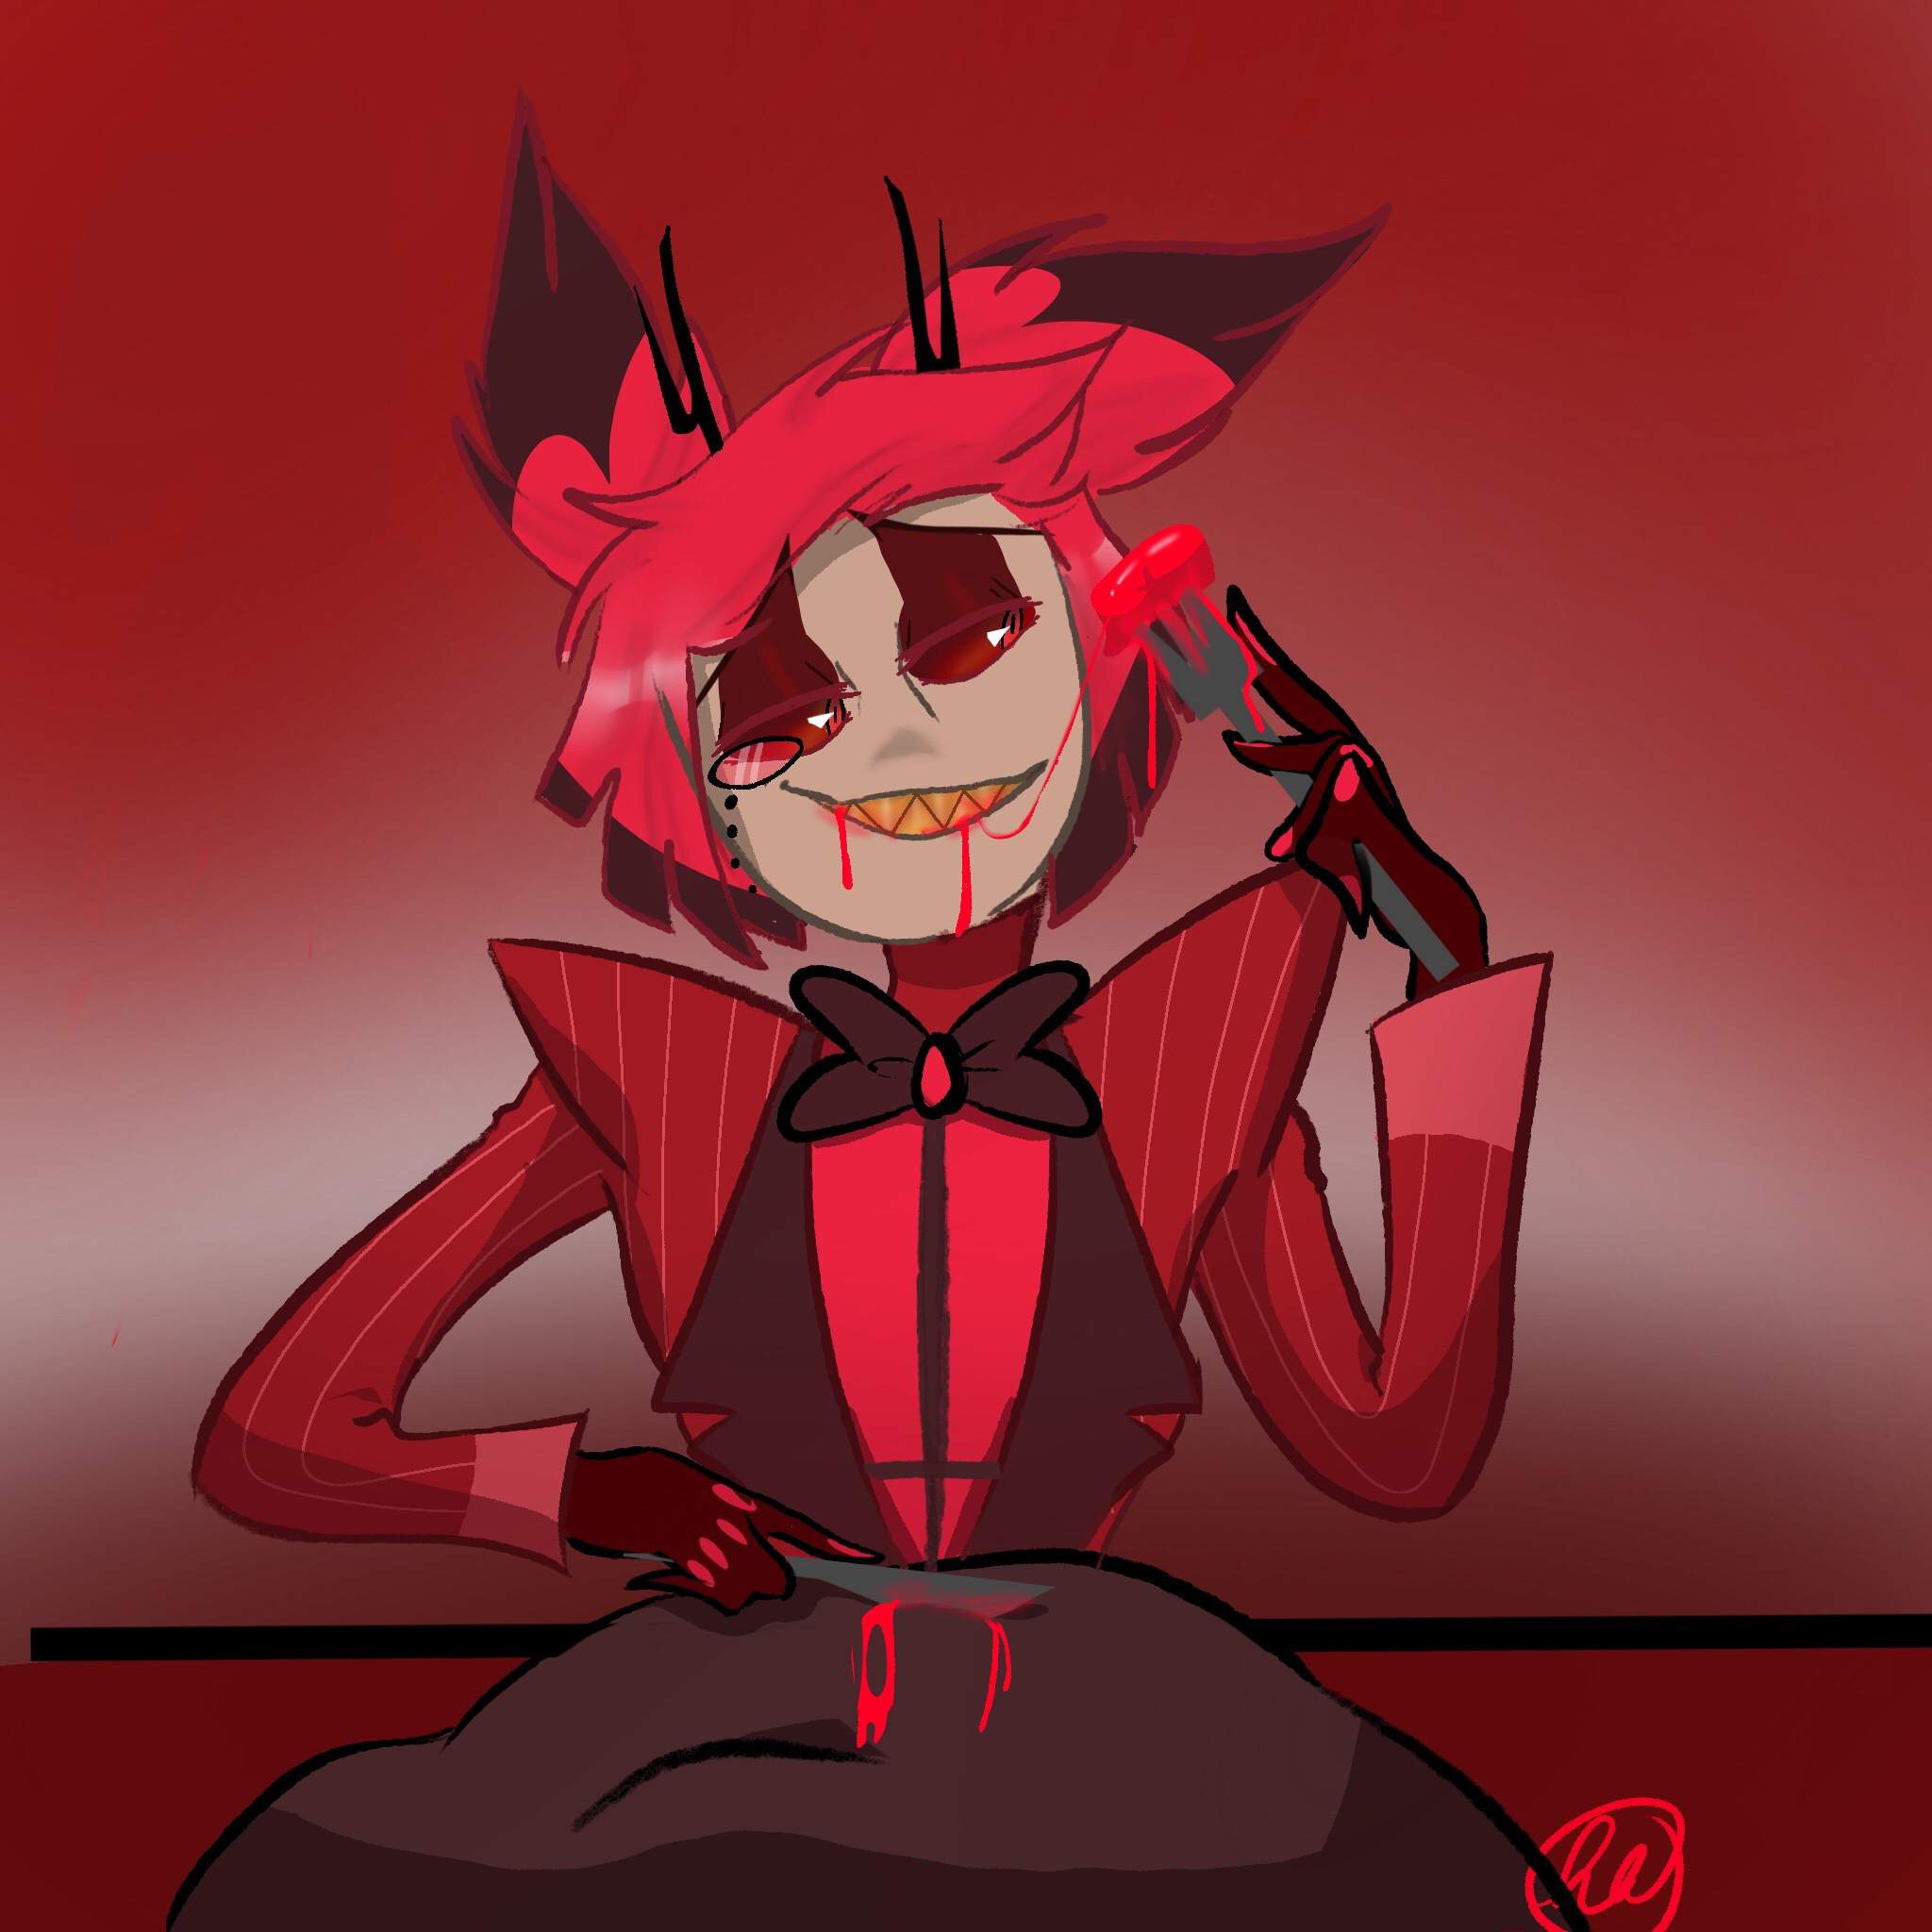 Come to dinner? / warning for some blood | Hazbin Hotel (official) Amino